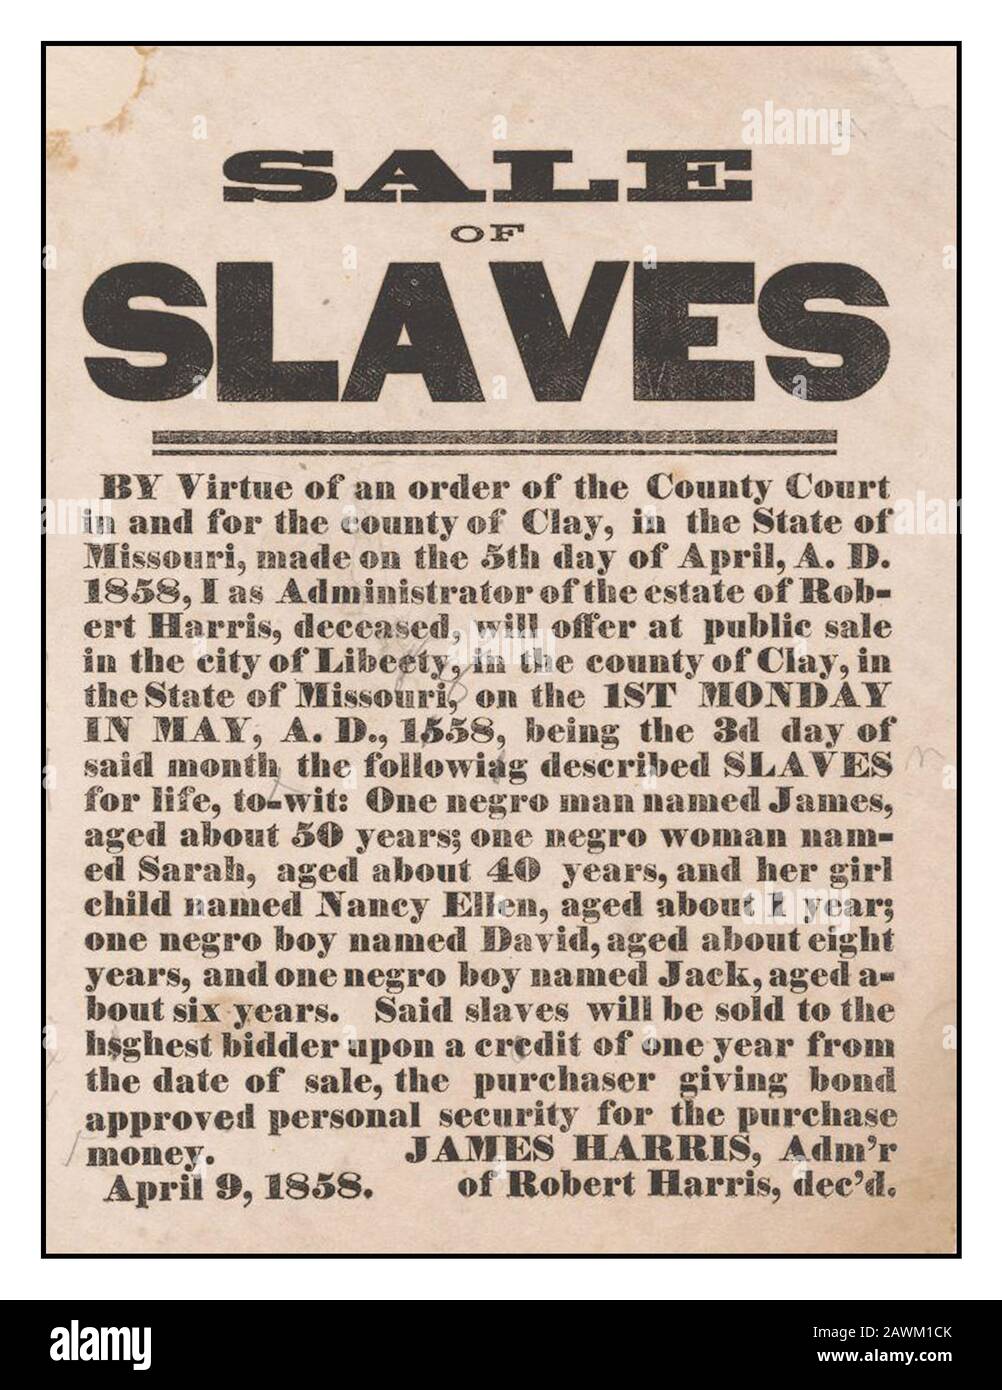 'SALE OF SLAVES'  NOTICE April 9 1858 Missouri Sale, Hire, Purchase, Slave Trade Collateral Documents Missouri USA by order of the county court for the county of Clay State of Missouri Public Sale of negro slaves Stock Photo